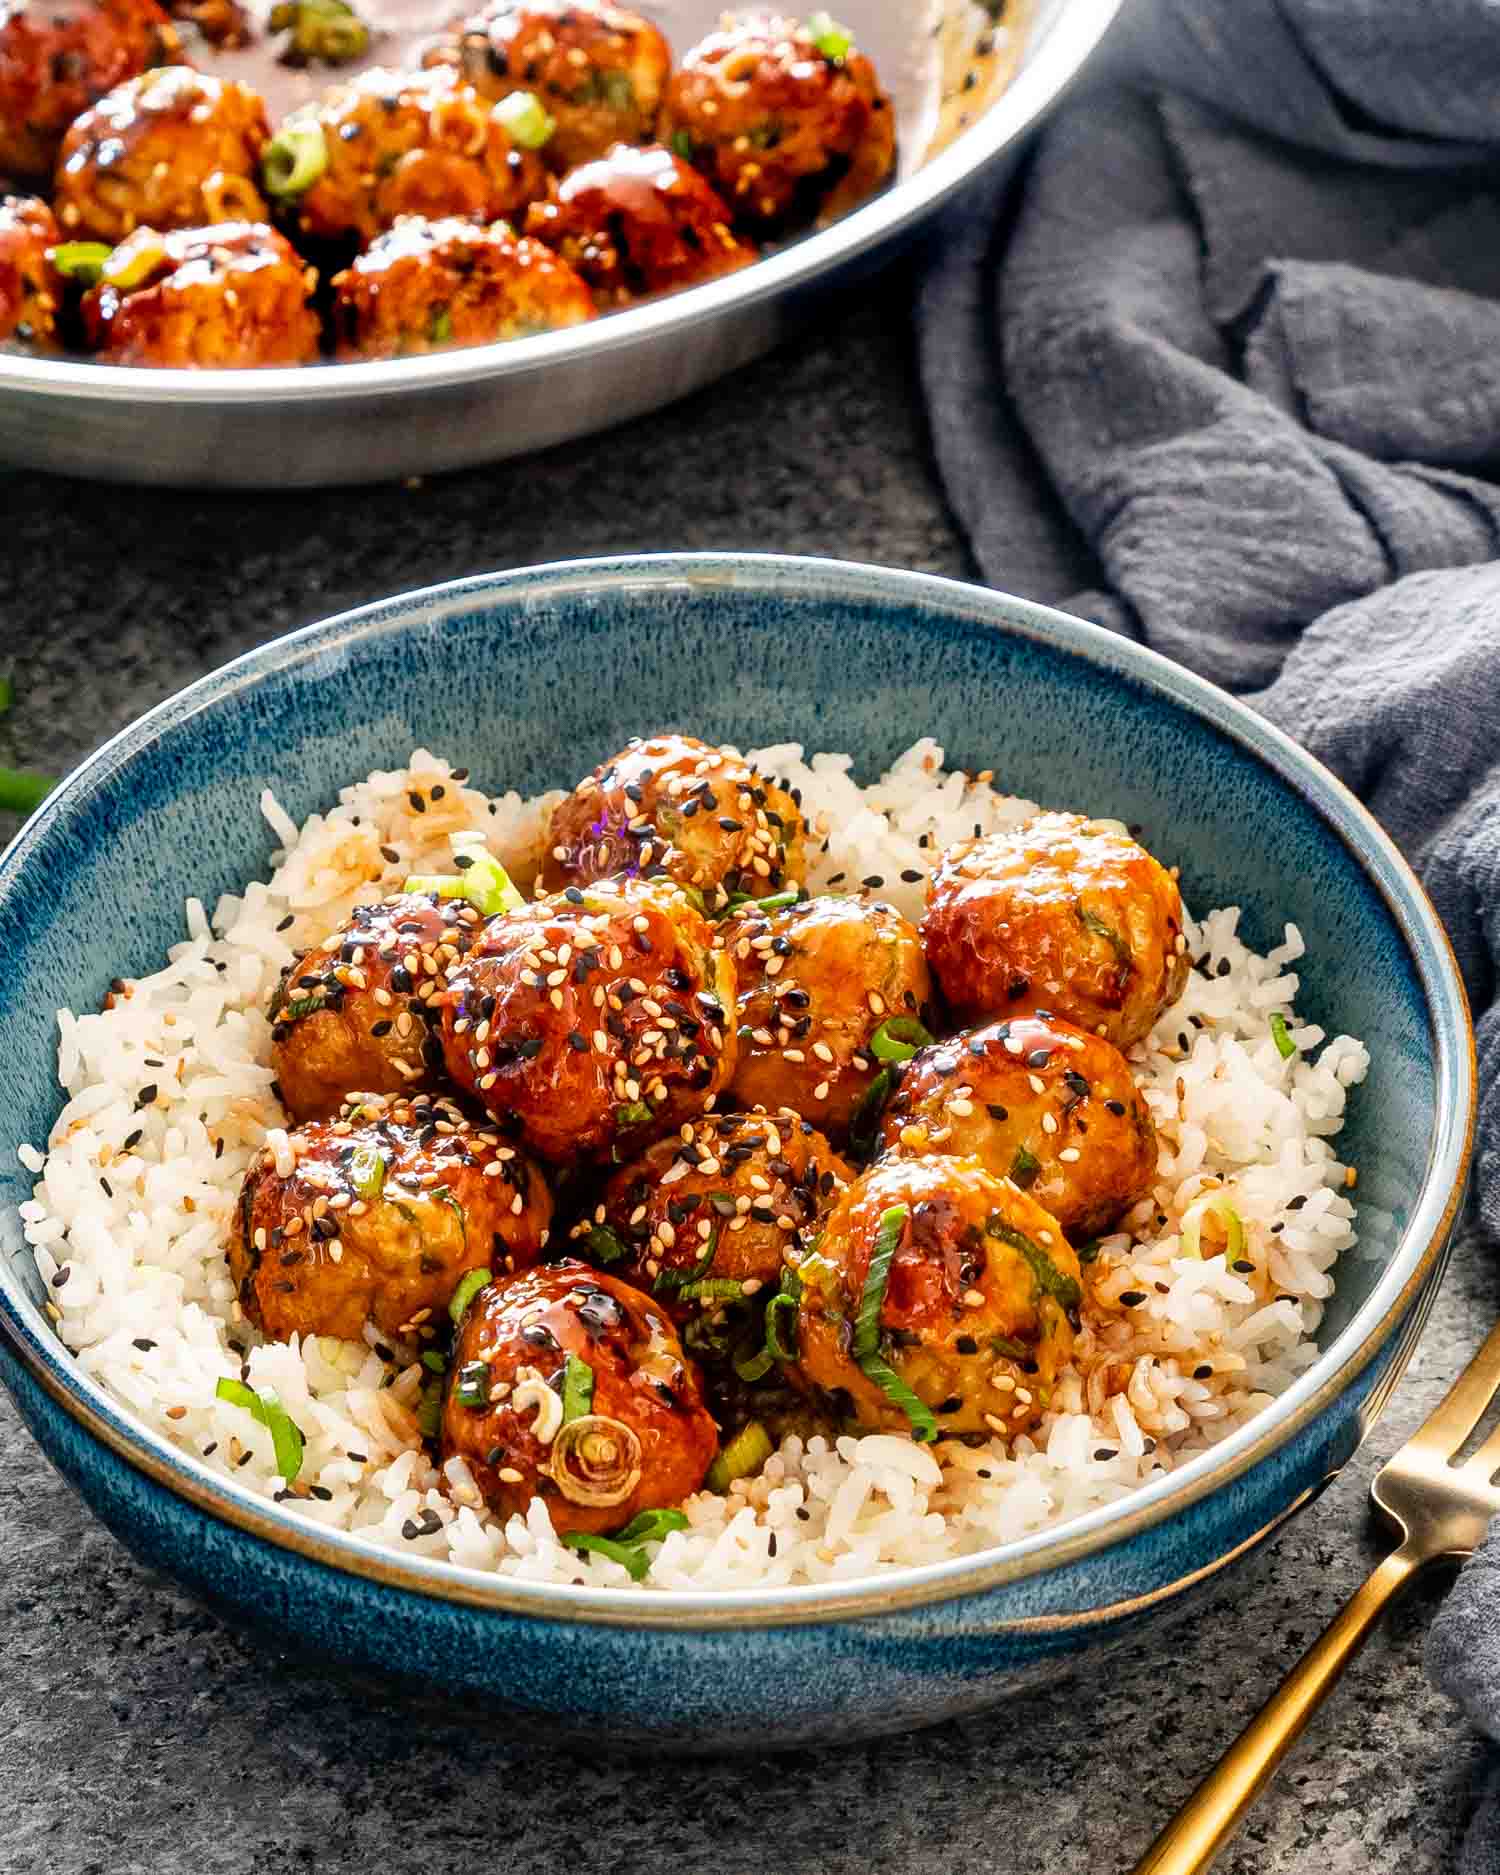 teriyaki chicken meatballs over a bed of rice in a blue bowl garnished with green onions.